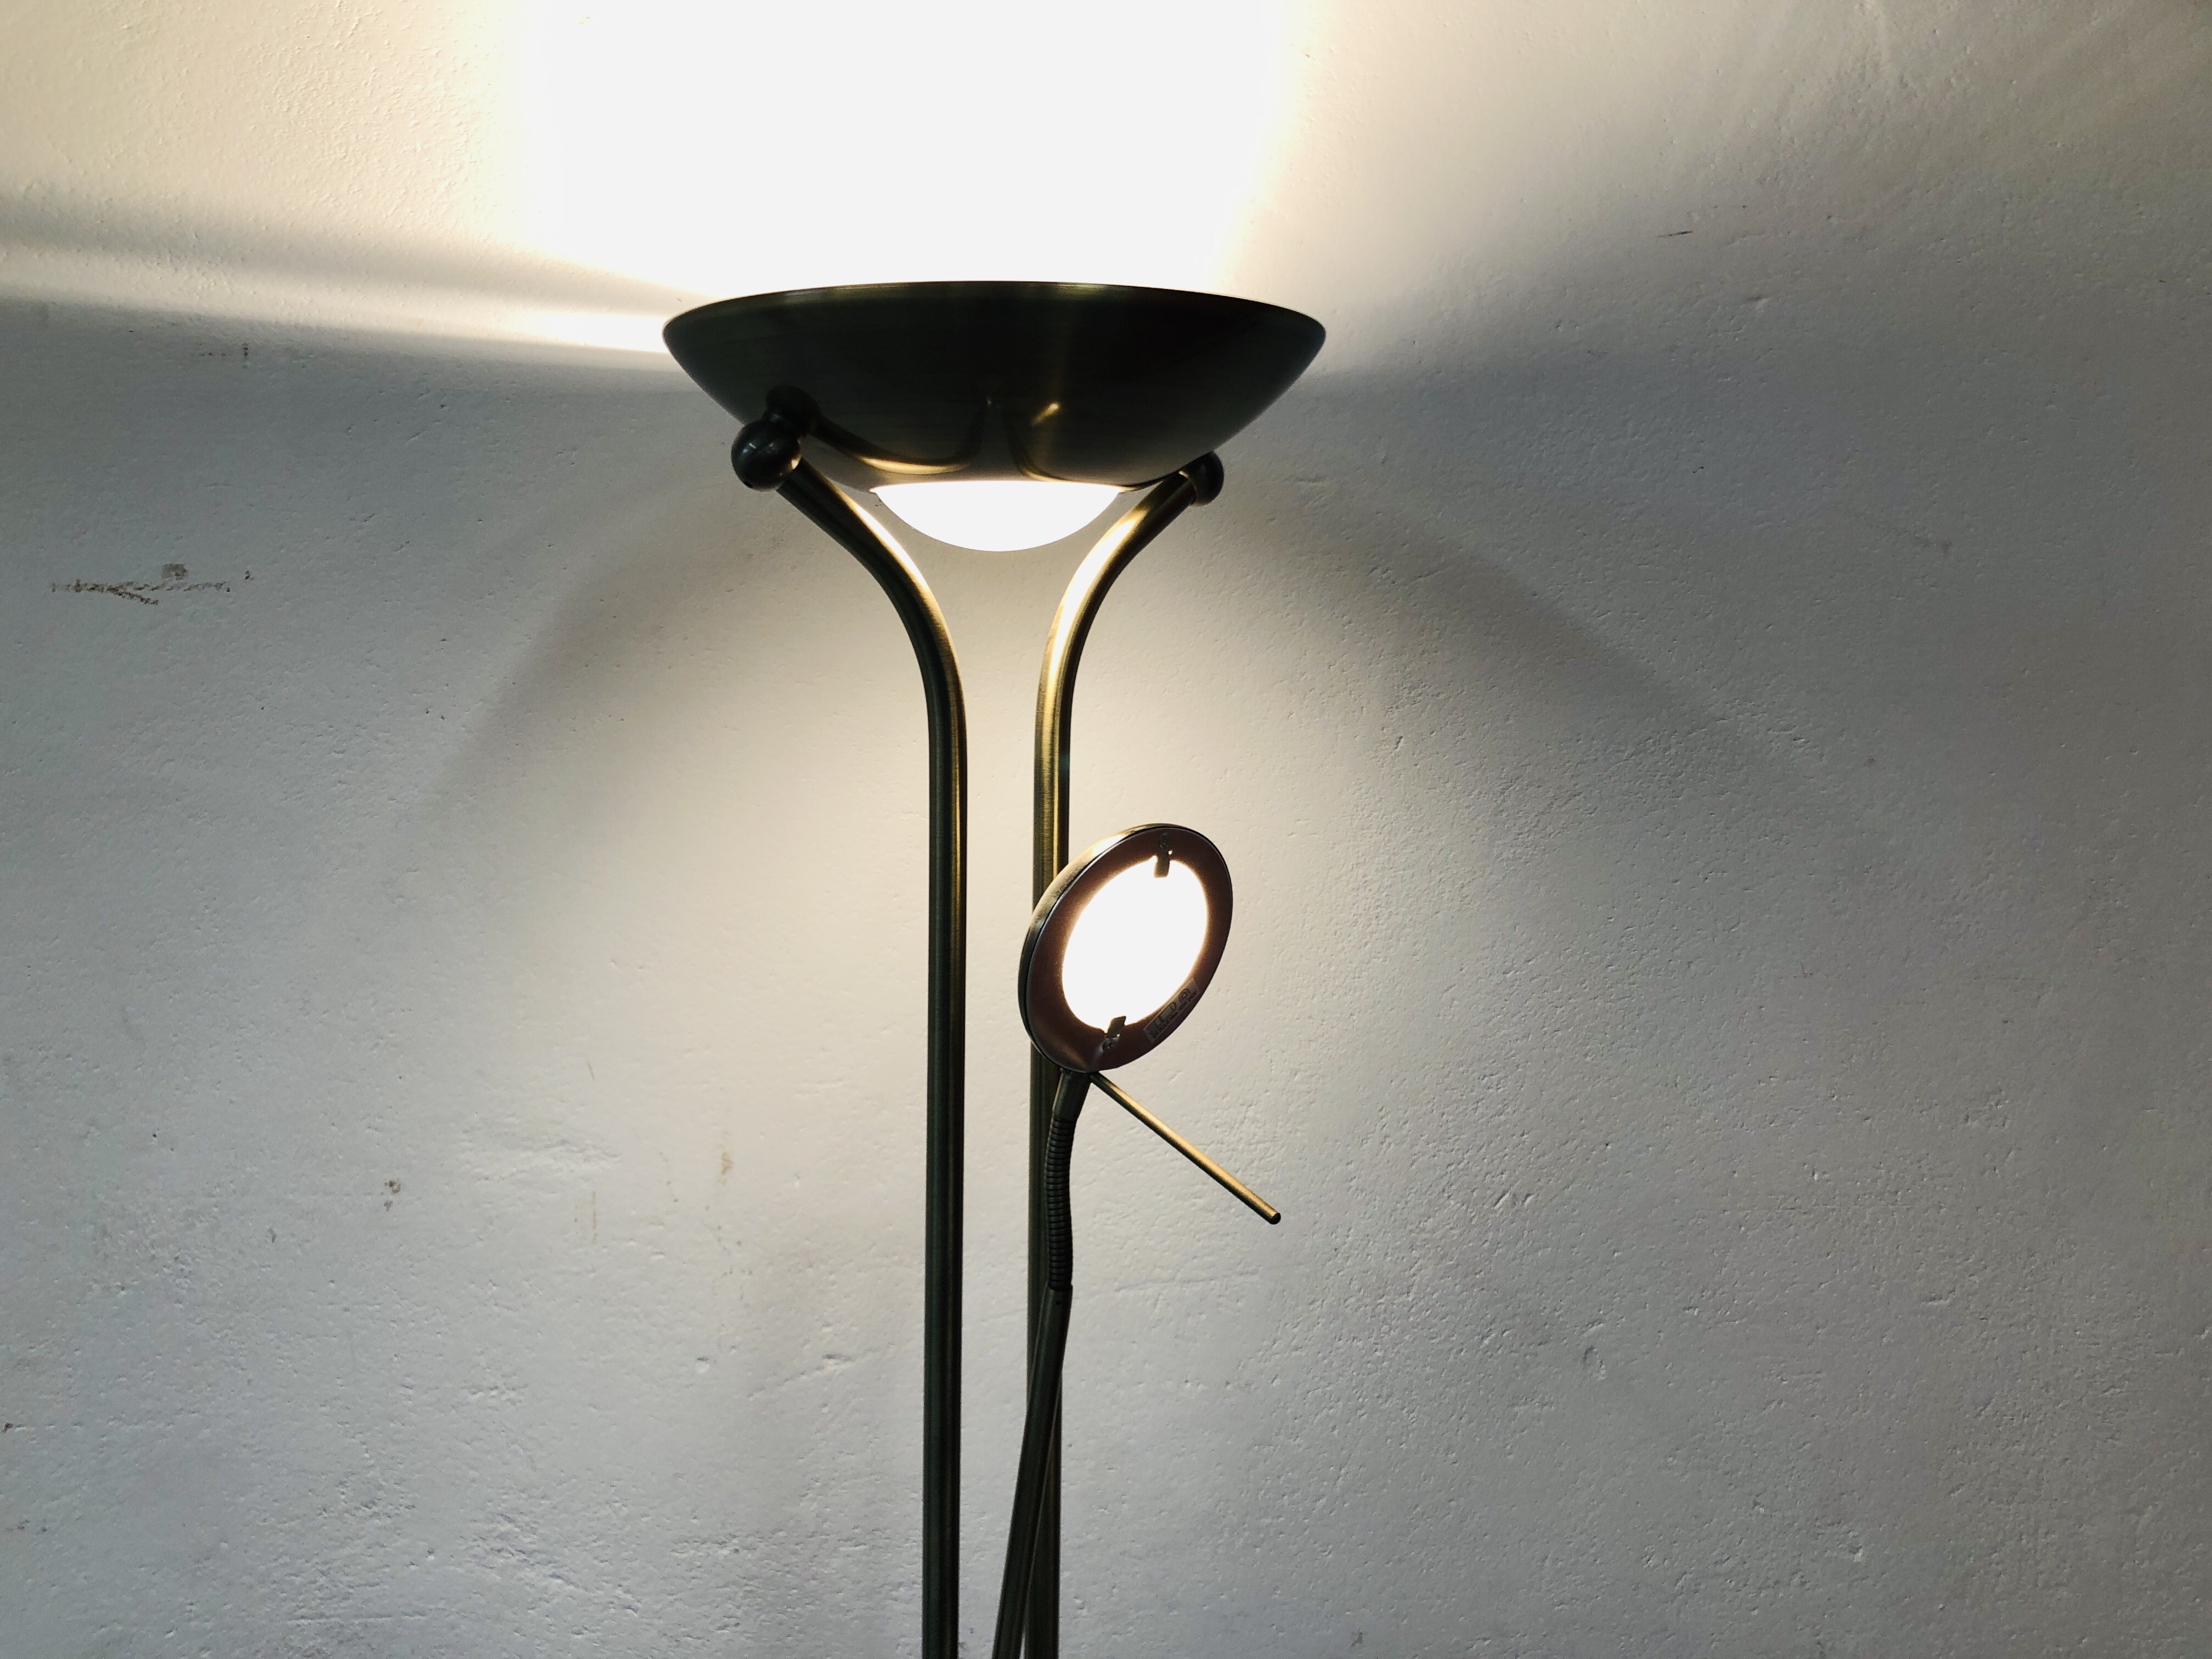 A MODERN BRASS FINISH UPLIGHTER WITH ADJUSTABLE READING LAMP - SOLD AS SEEN - Image 7 of 8